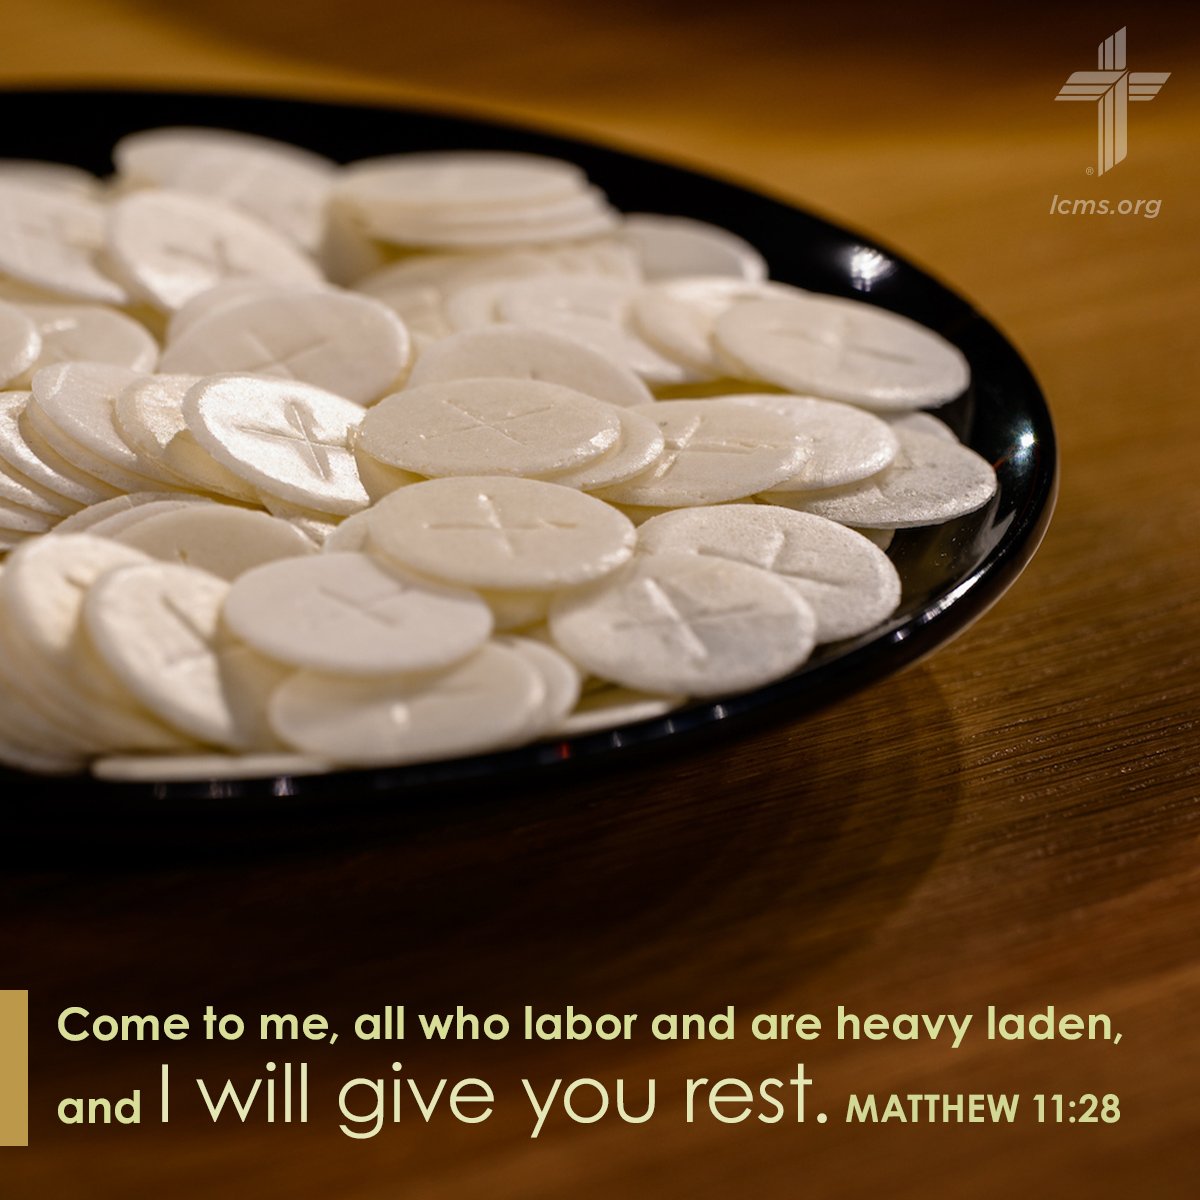 'Come to me, all who labor and are heavy laden, and I will give you rest. Take my yoke upon you, and learn from me, for I am gentle and lowly in heart, and you will find rest for your souls. For my yoke is easy, and my burden is light.” Matthew 11:28–30